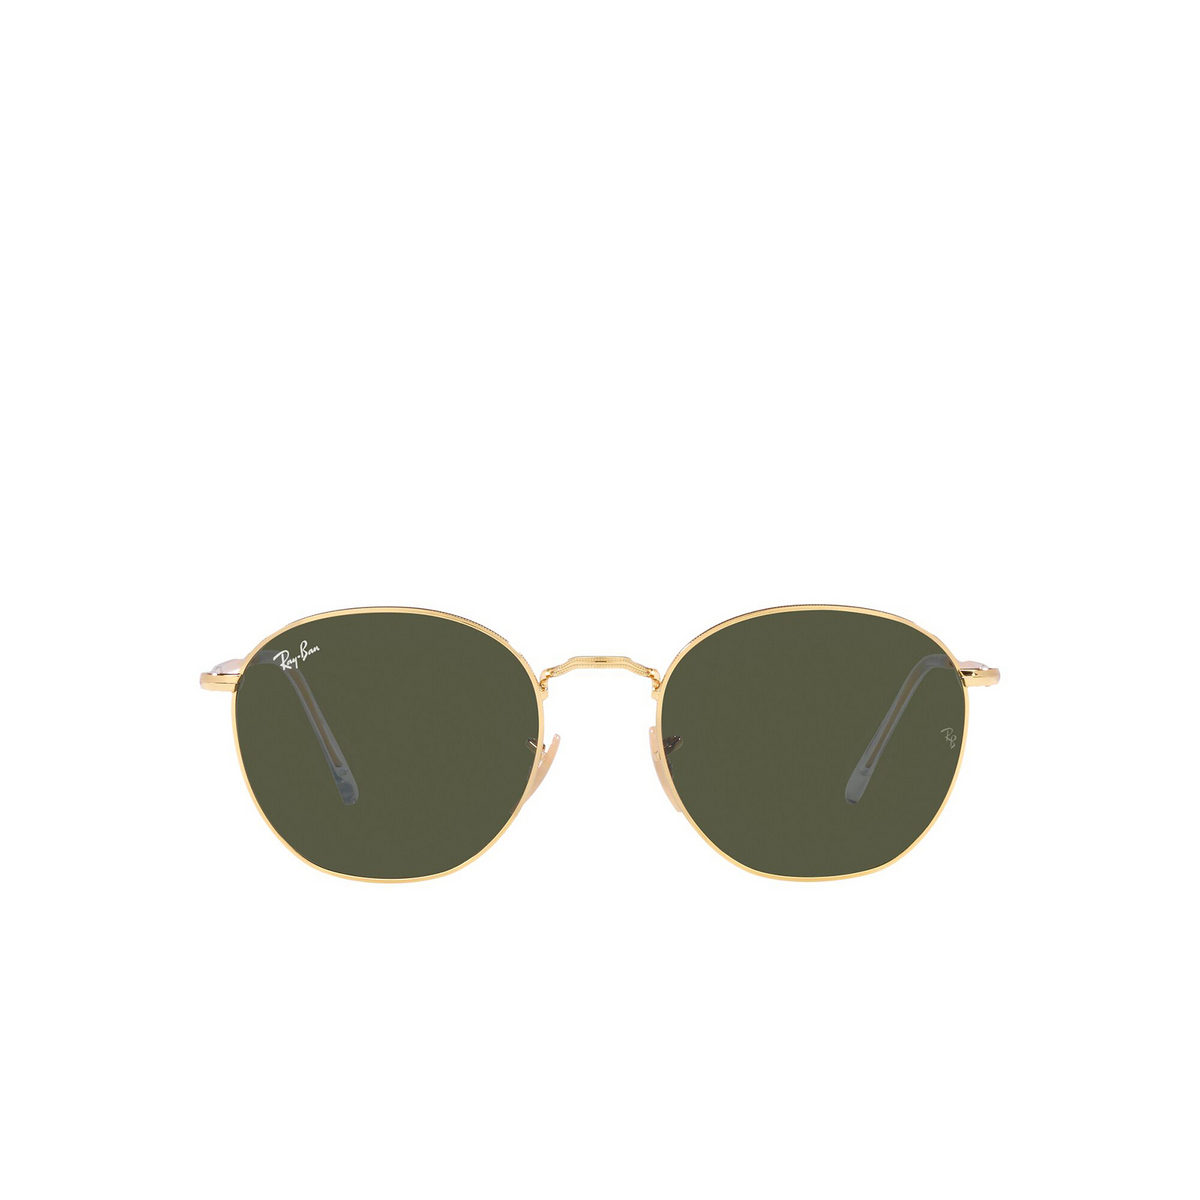 Ray-Ban ROB Sunglasses 001/31 Arista - front view